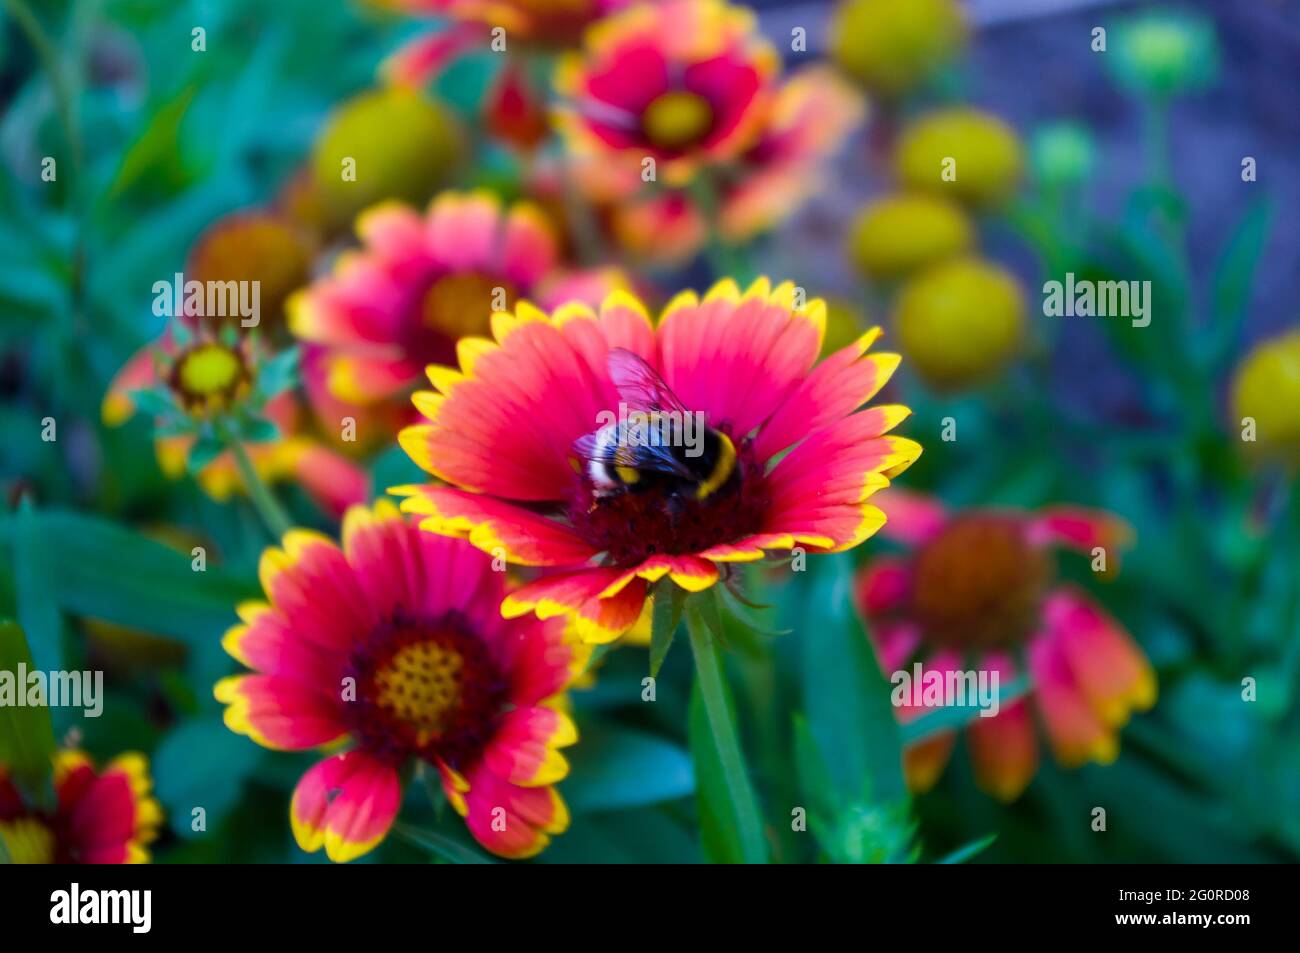 Red and yellow colorful flowers Gailardia in garden, pollination by bees, closeup Stock Photo